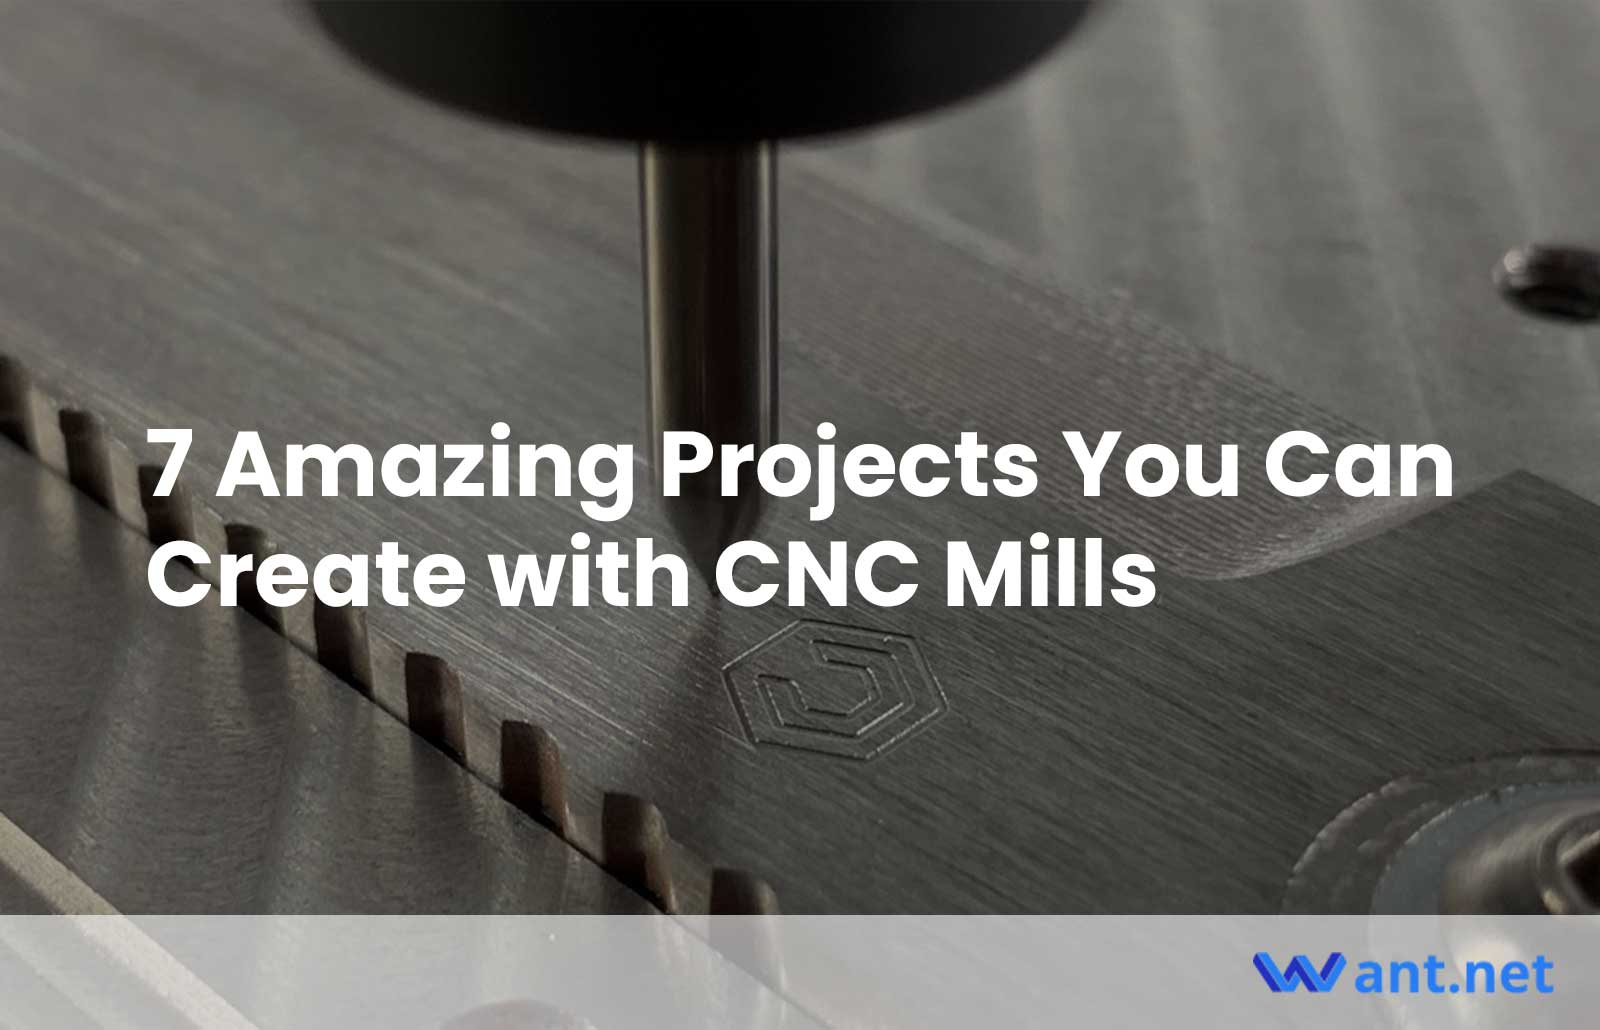 7 Amazing Projects You Can Create with CNC Mills